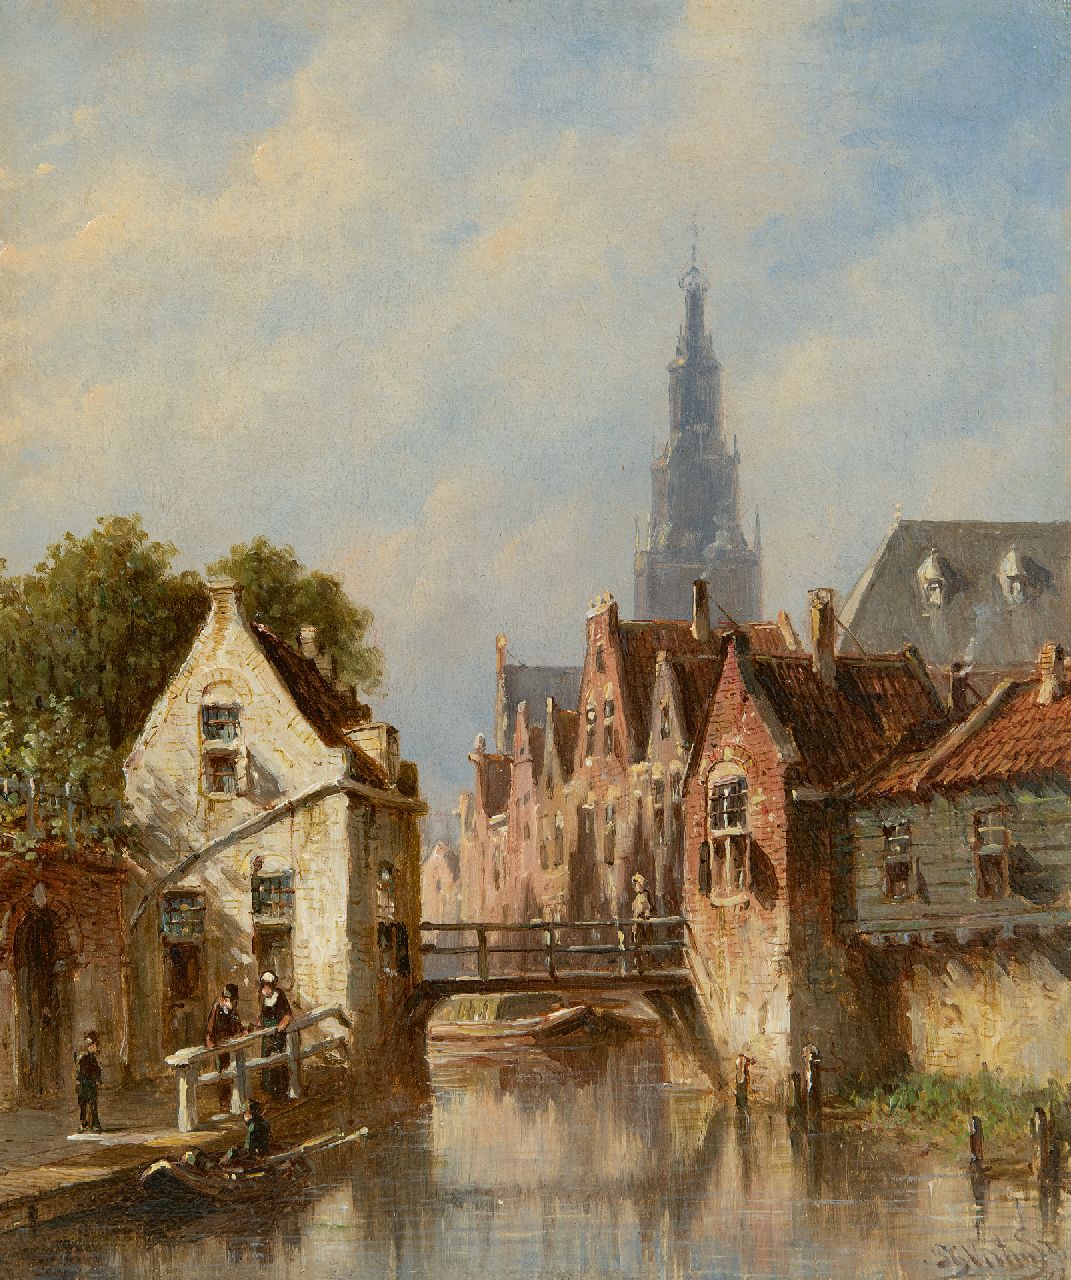 Vertin P.G.  | Petrus Gerardus Vertin | Paintings offered for sale | Sunny city canal, the Alkmaar Waagtoren in the background, oil on panel 22.7 x 19.4 cm, signed l.r. and dated 1881 on the reverse